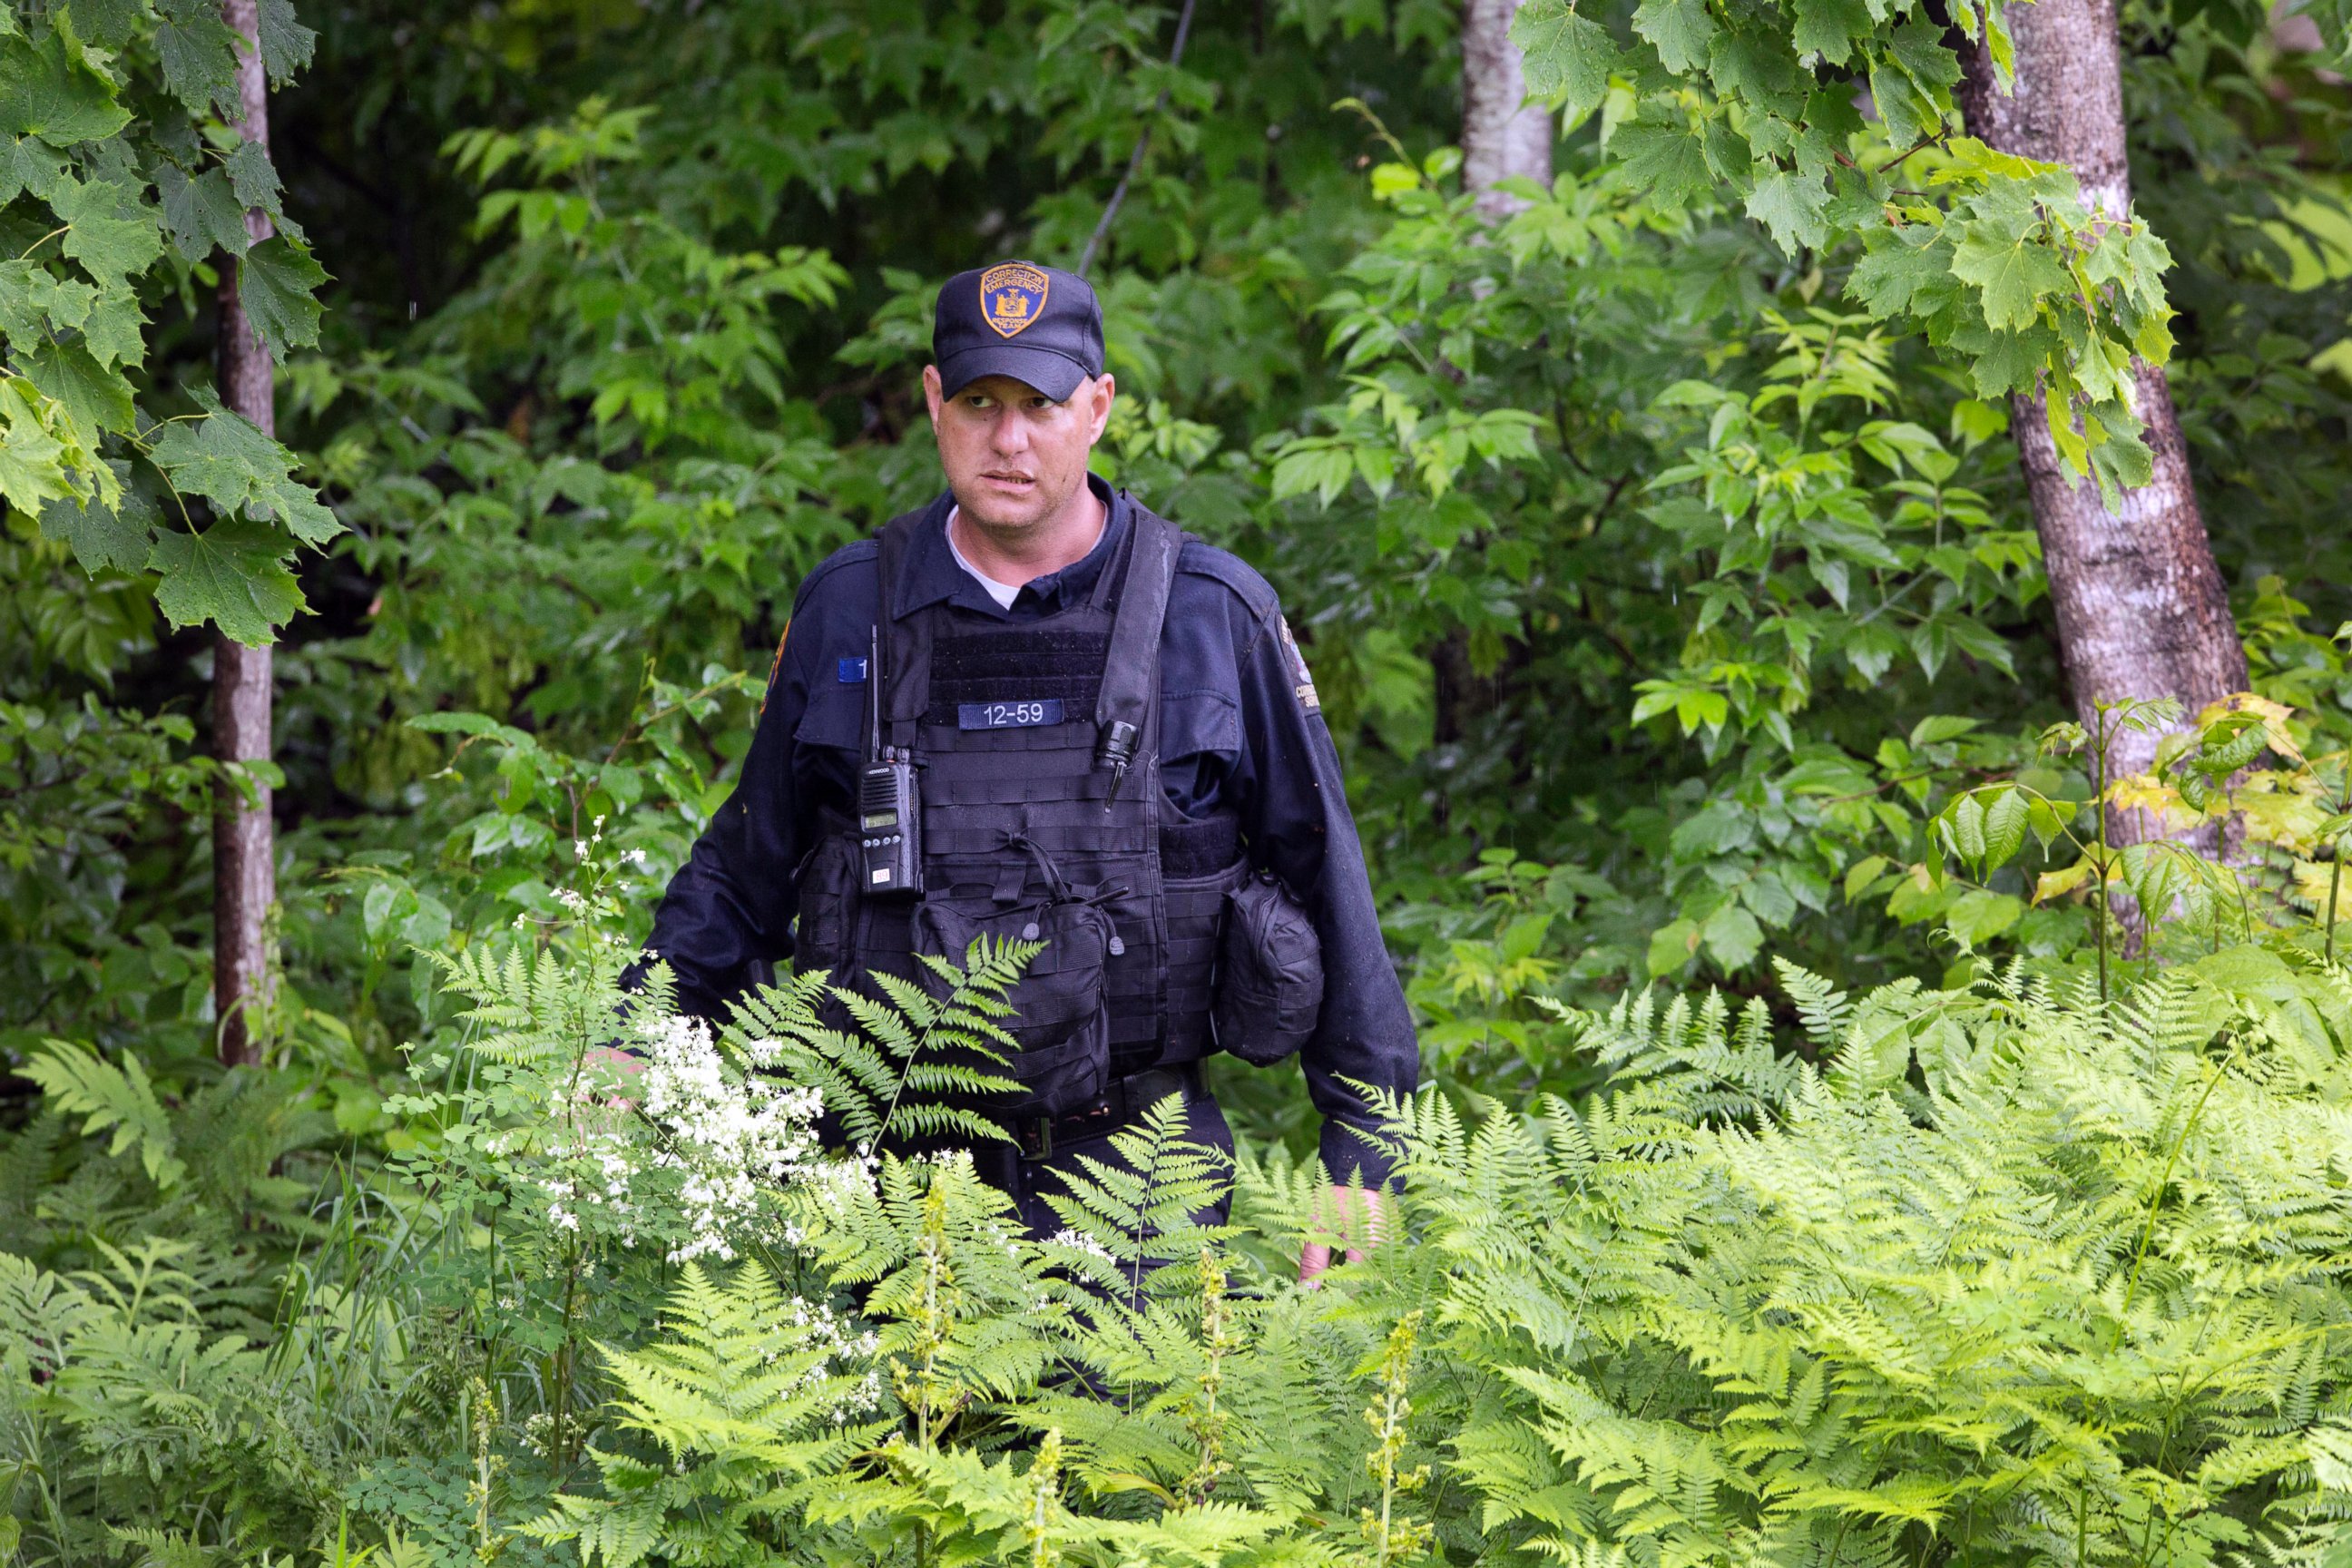 PHOTO: A corrections officer emerges from the woods after searching with a team near the Clinton Correctional Facility, June 16, 2015, Dannemora, N.Y.